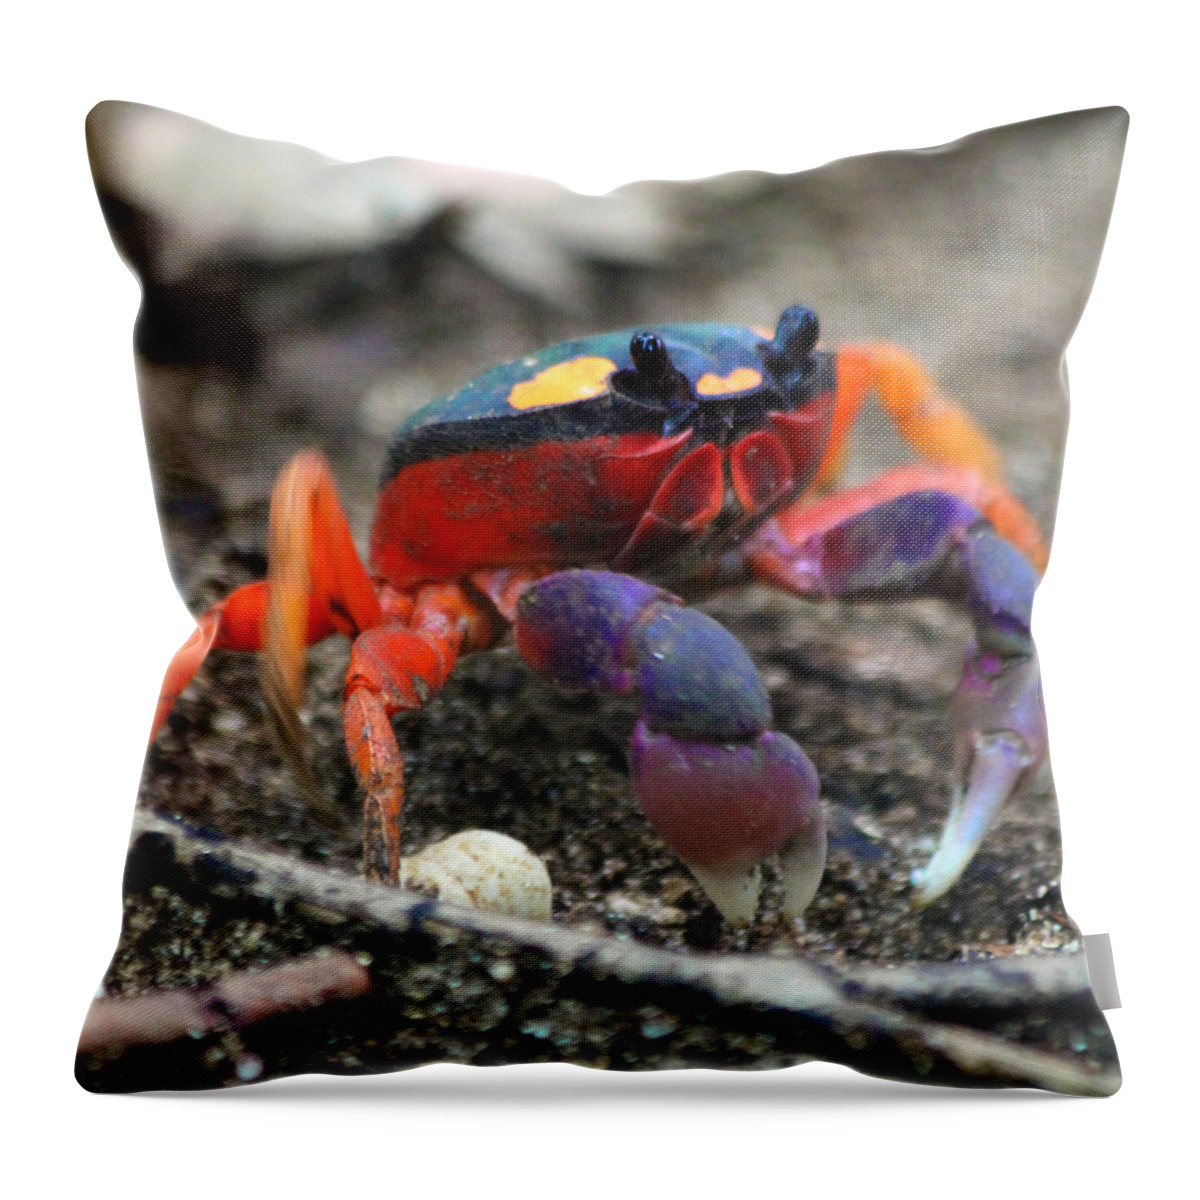 Crab Throw Pillow featuring the photograph Mouthless Crab by Nathan Miller